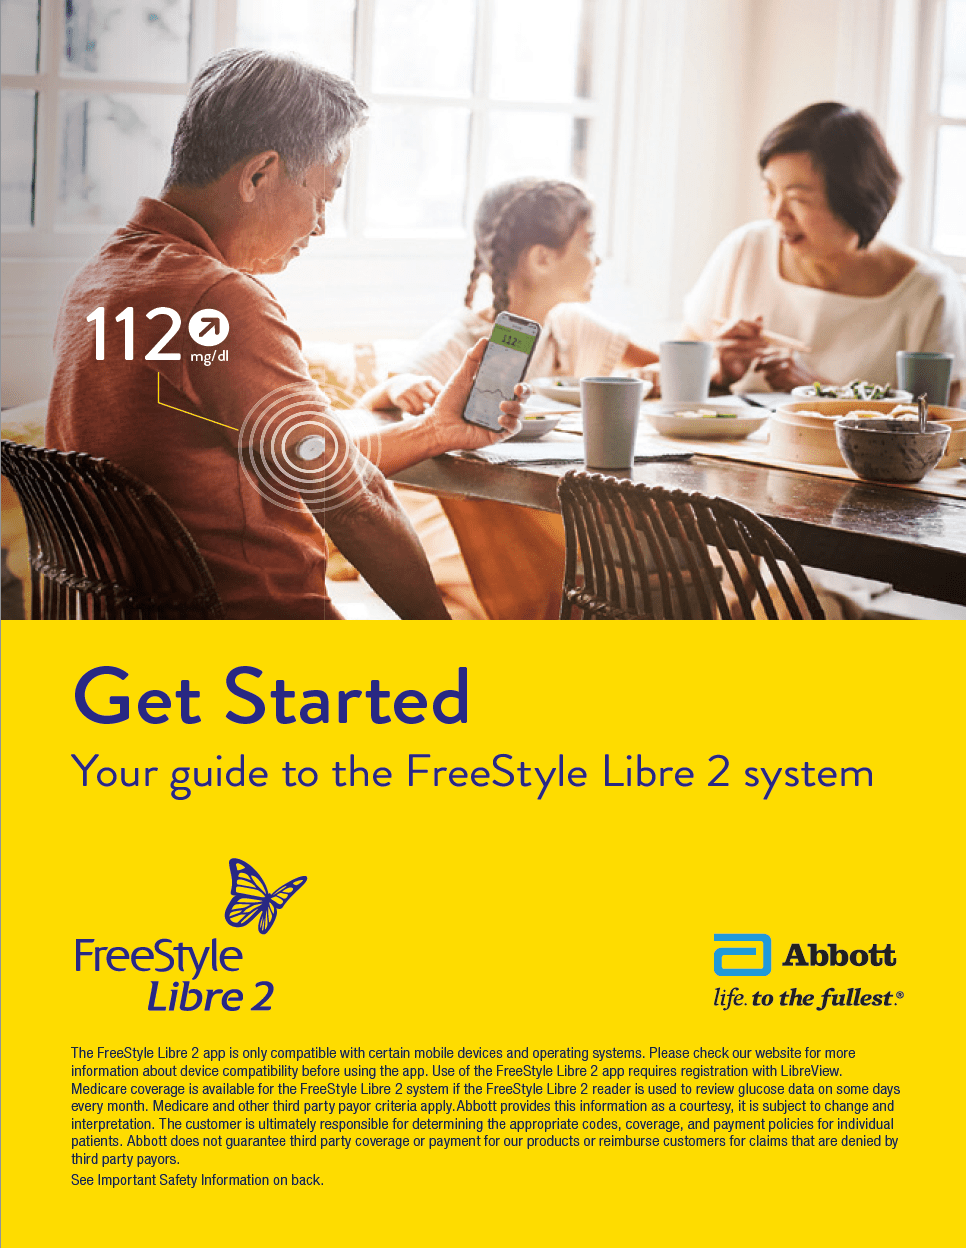 FreeStyle Libre 2 Getting Started Guide